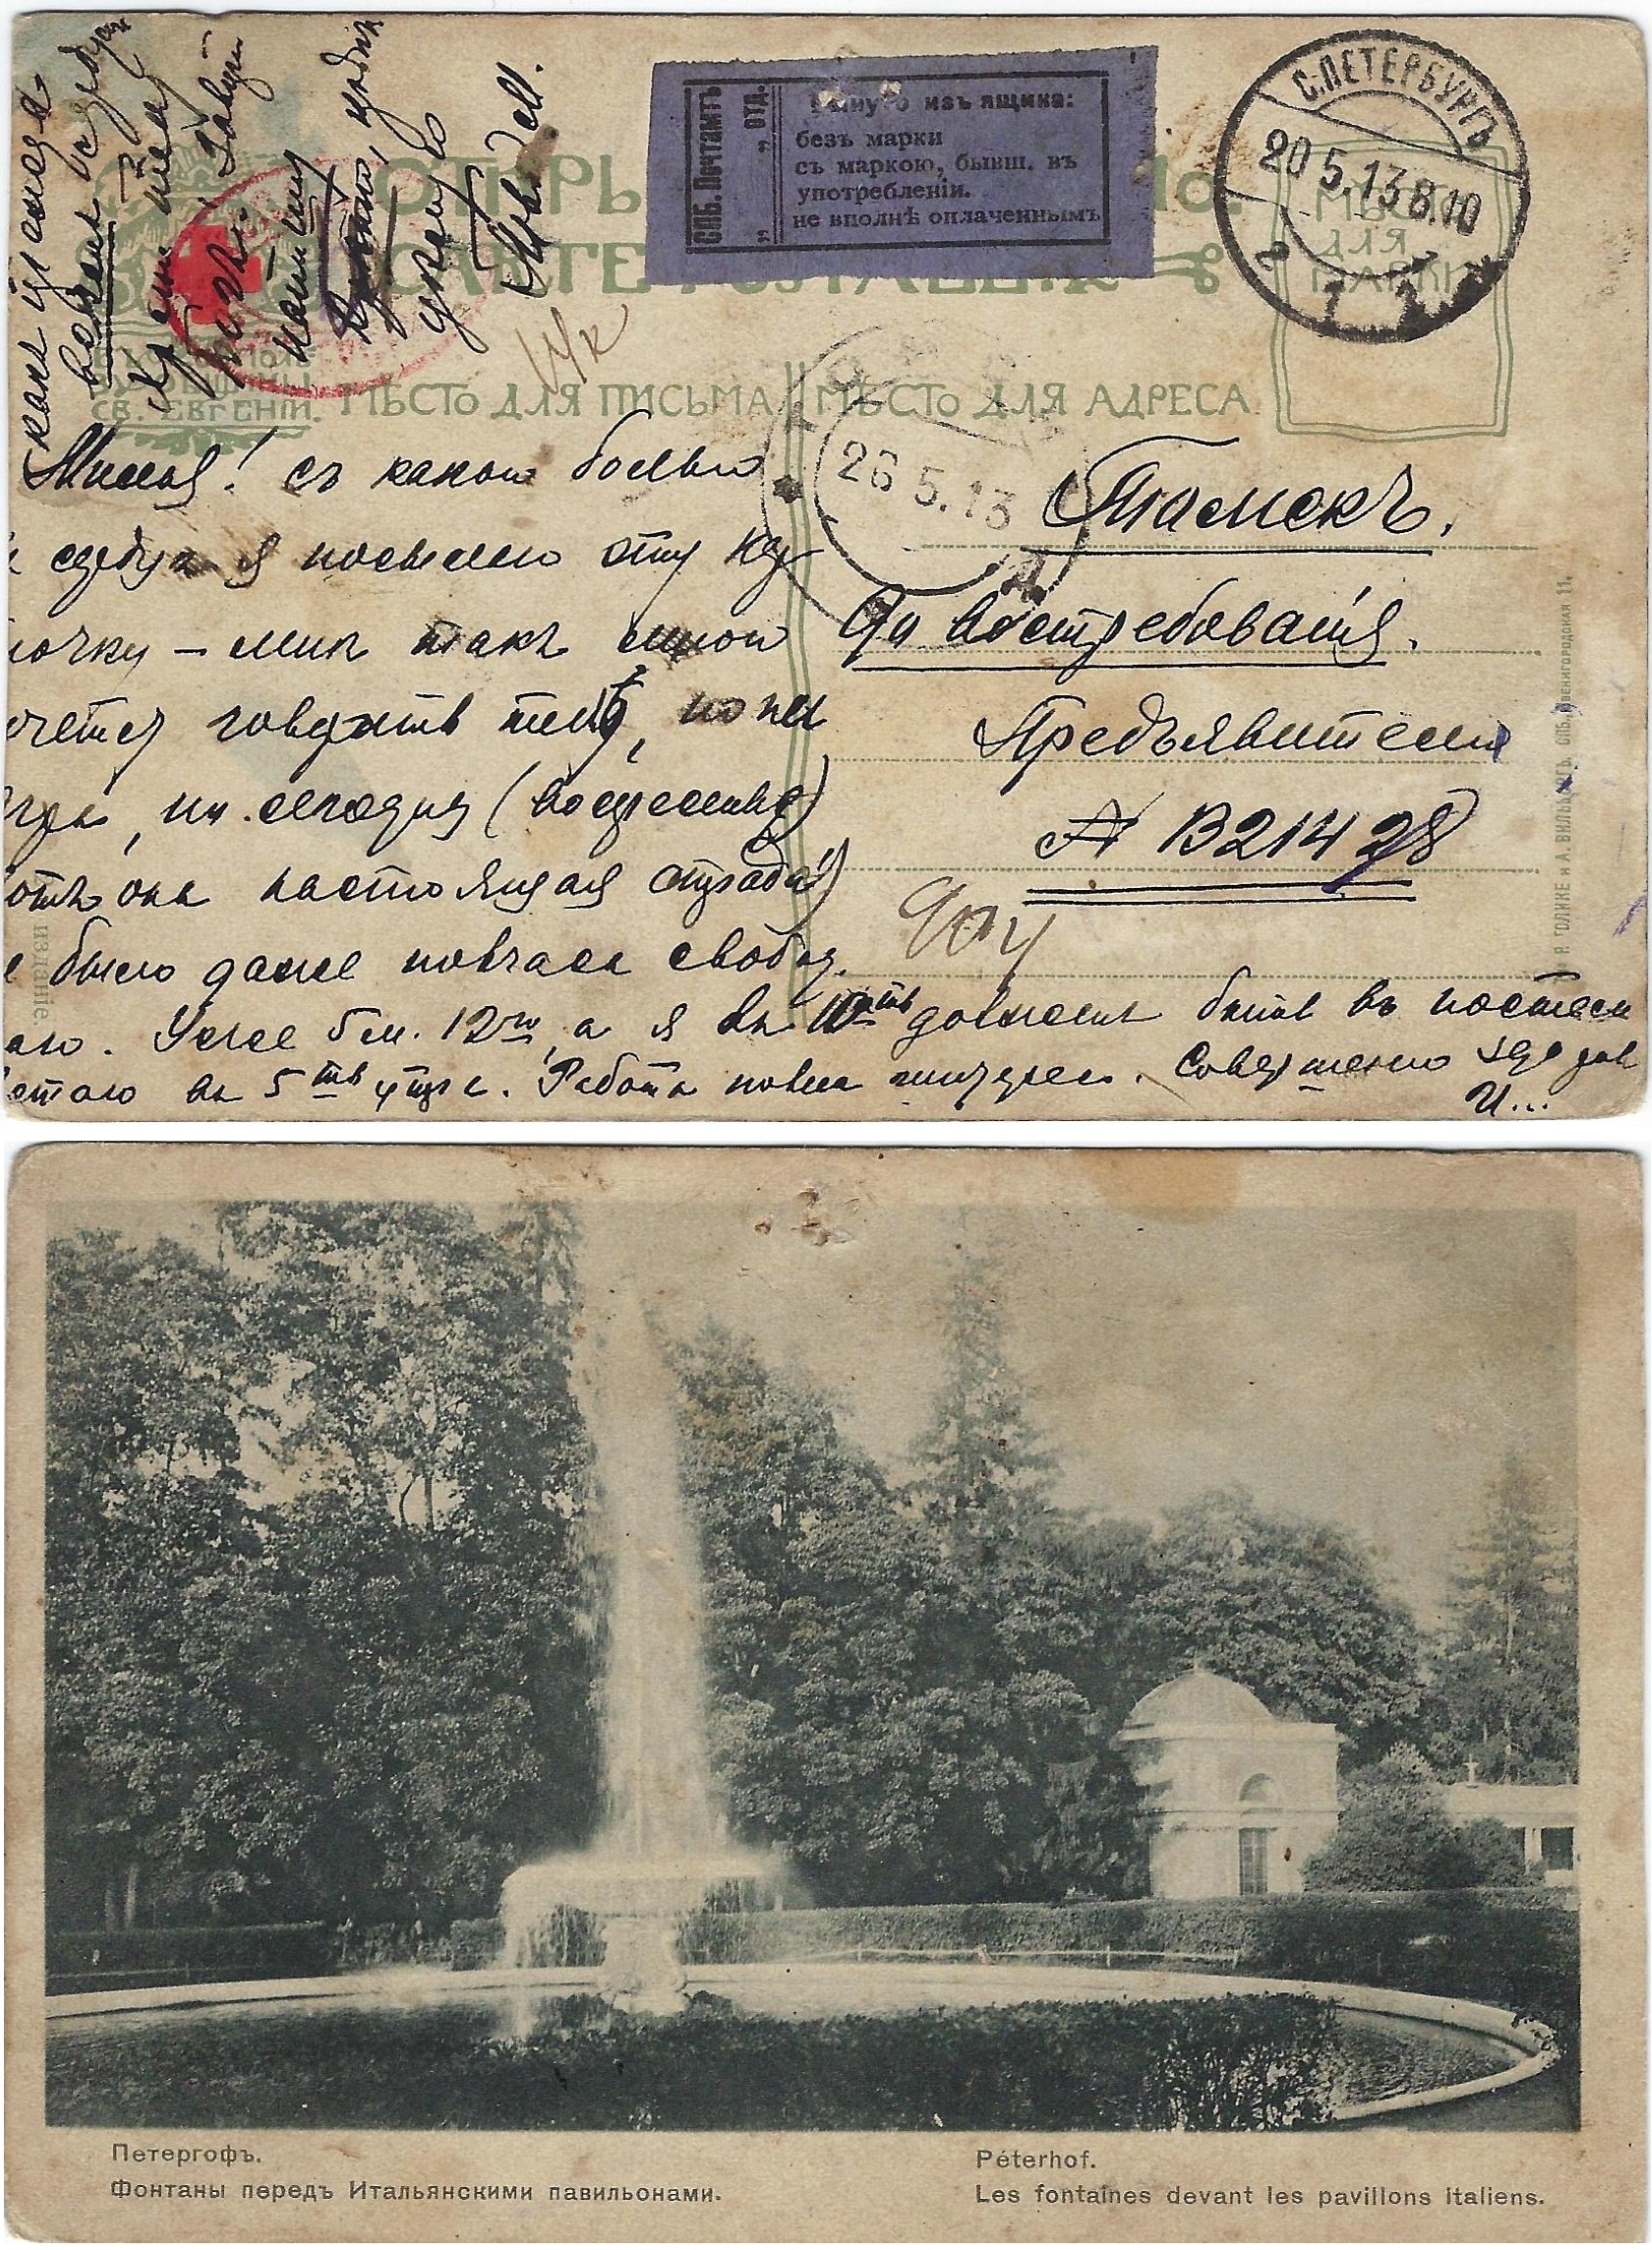 Russia Postal History - Postmarks removed from mailbox Scott 11913 